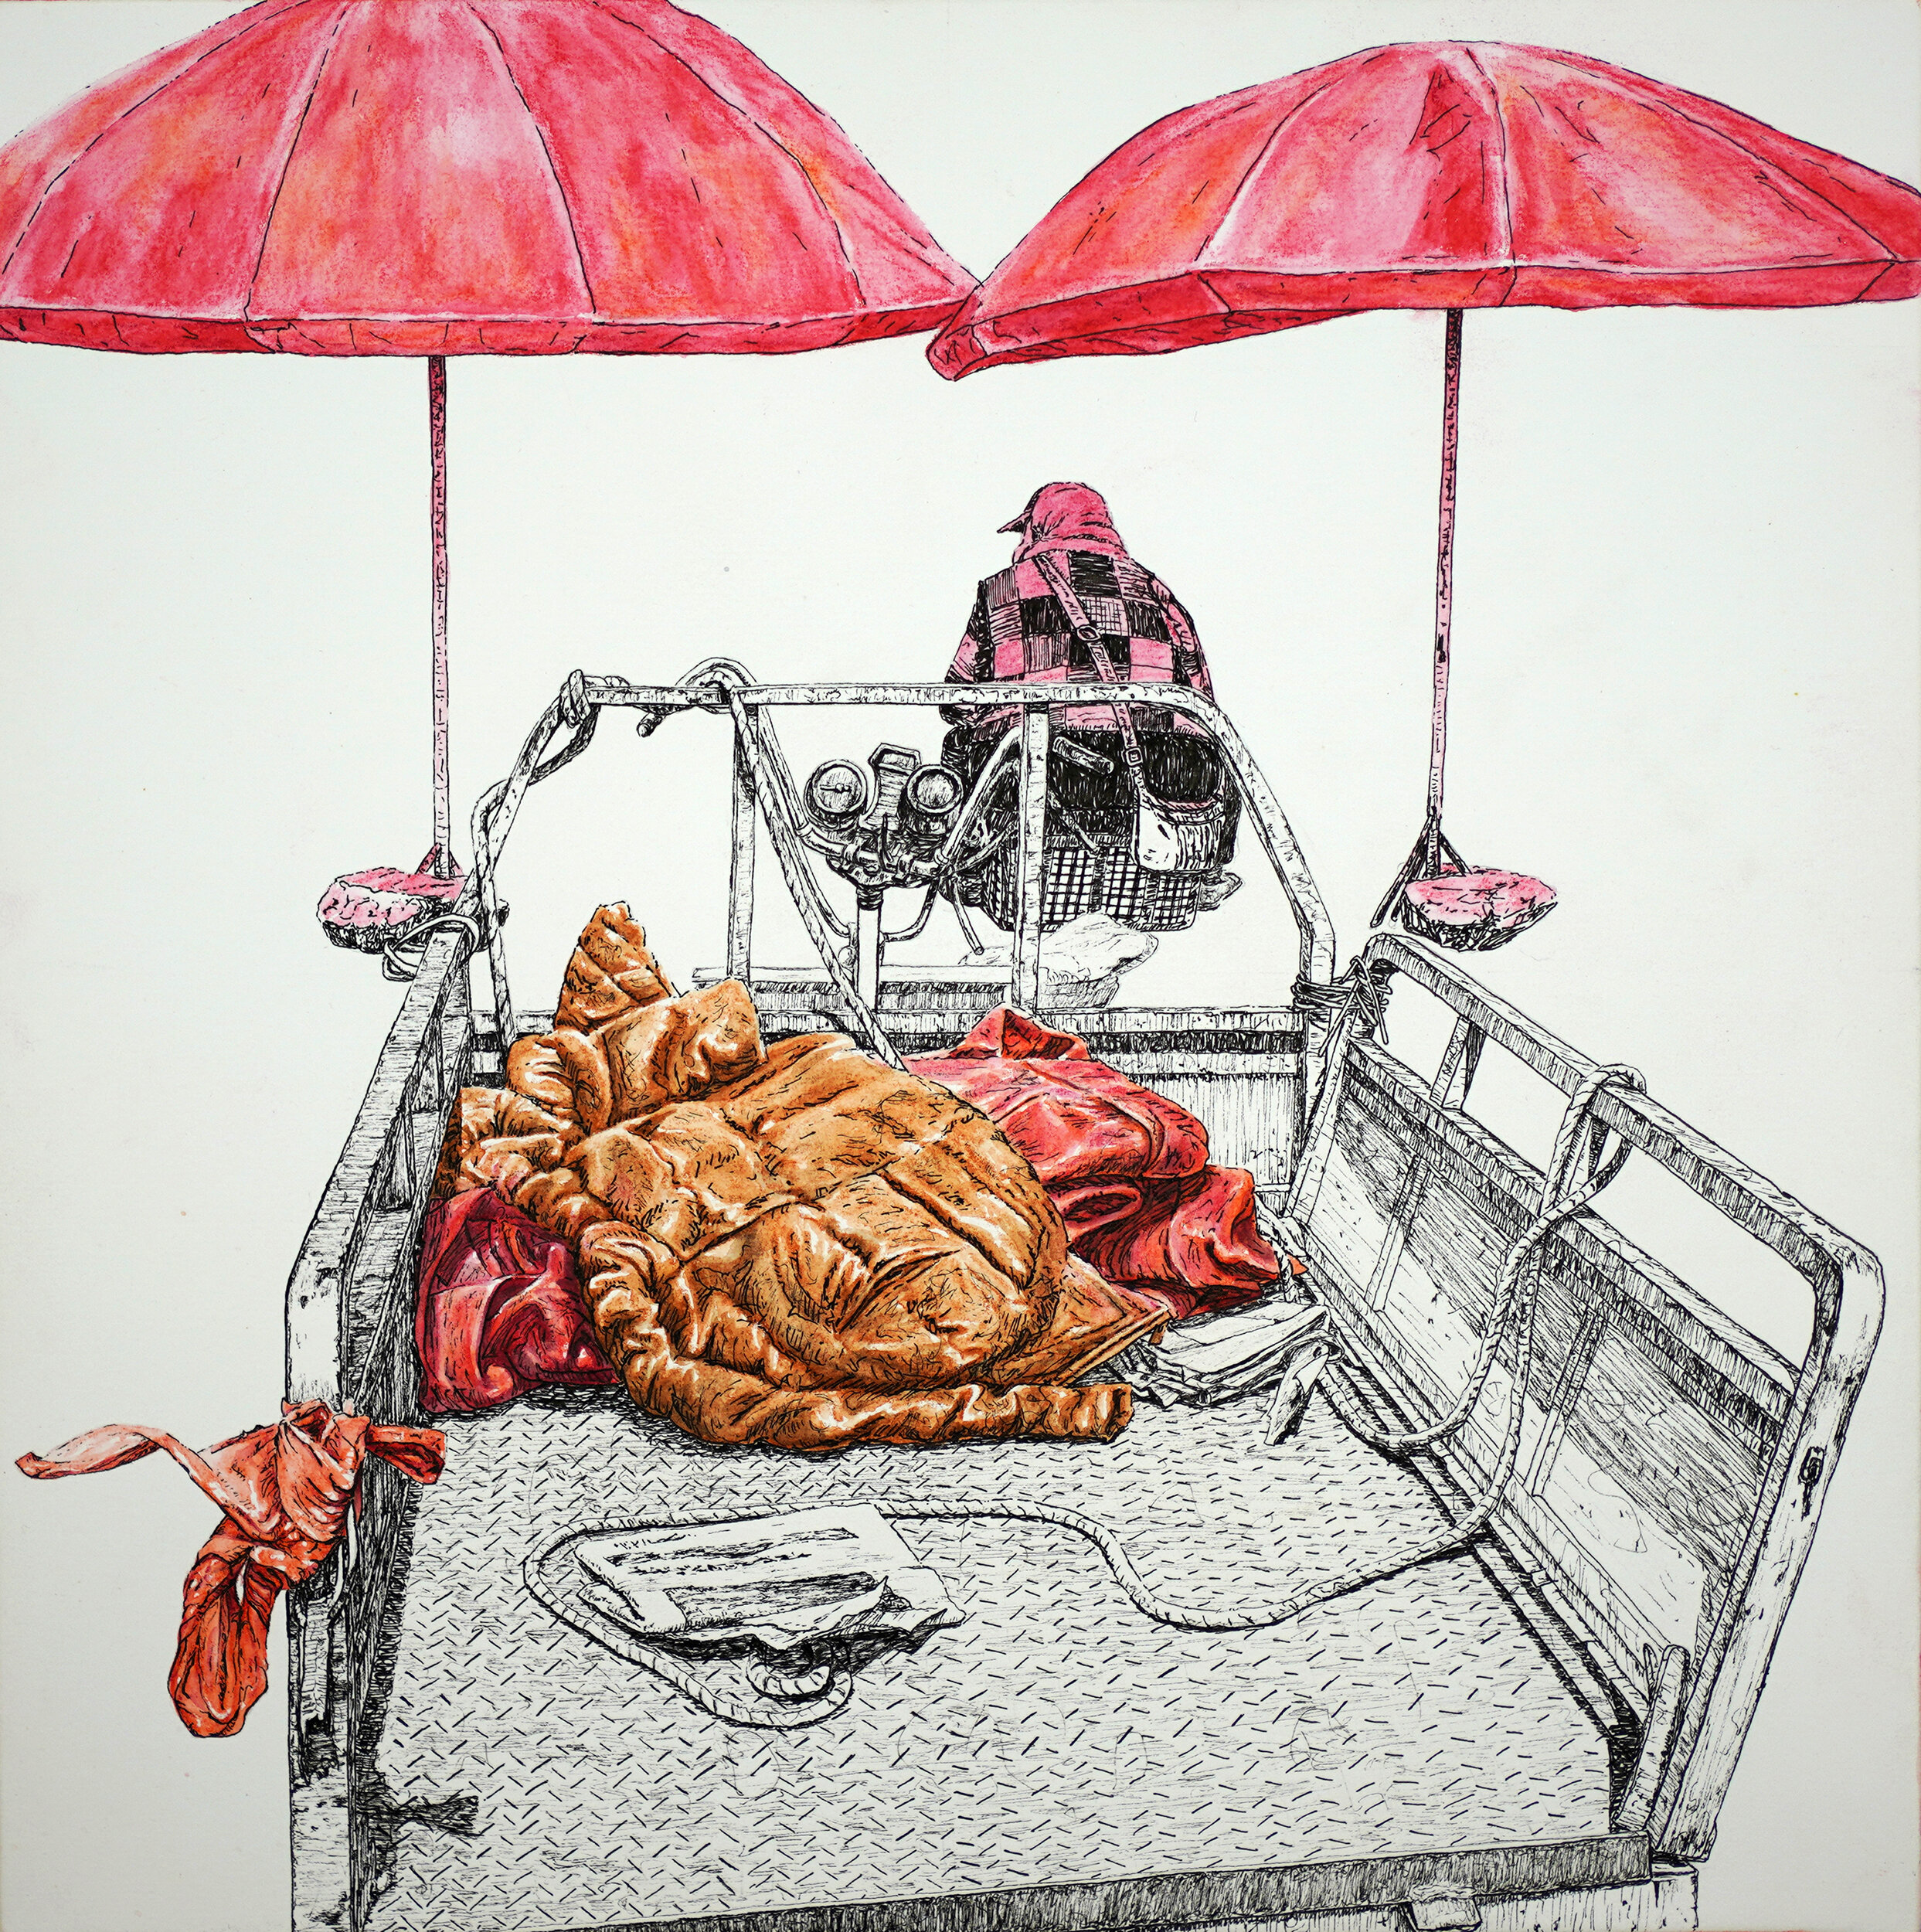   Under the Red Umbrellas , 2021, ink and watercolor pencil on paper, 30 x 30 cm 